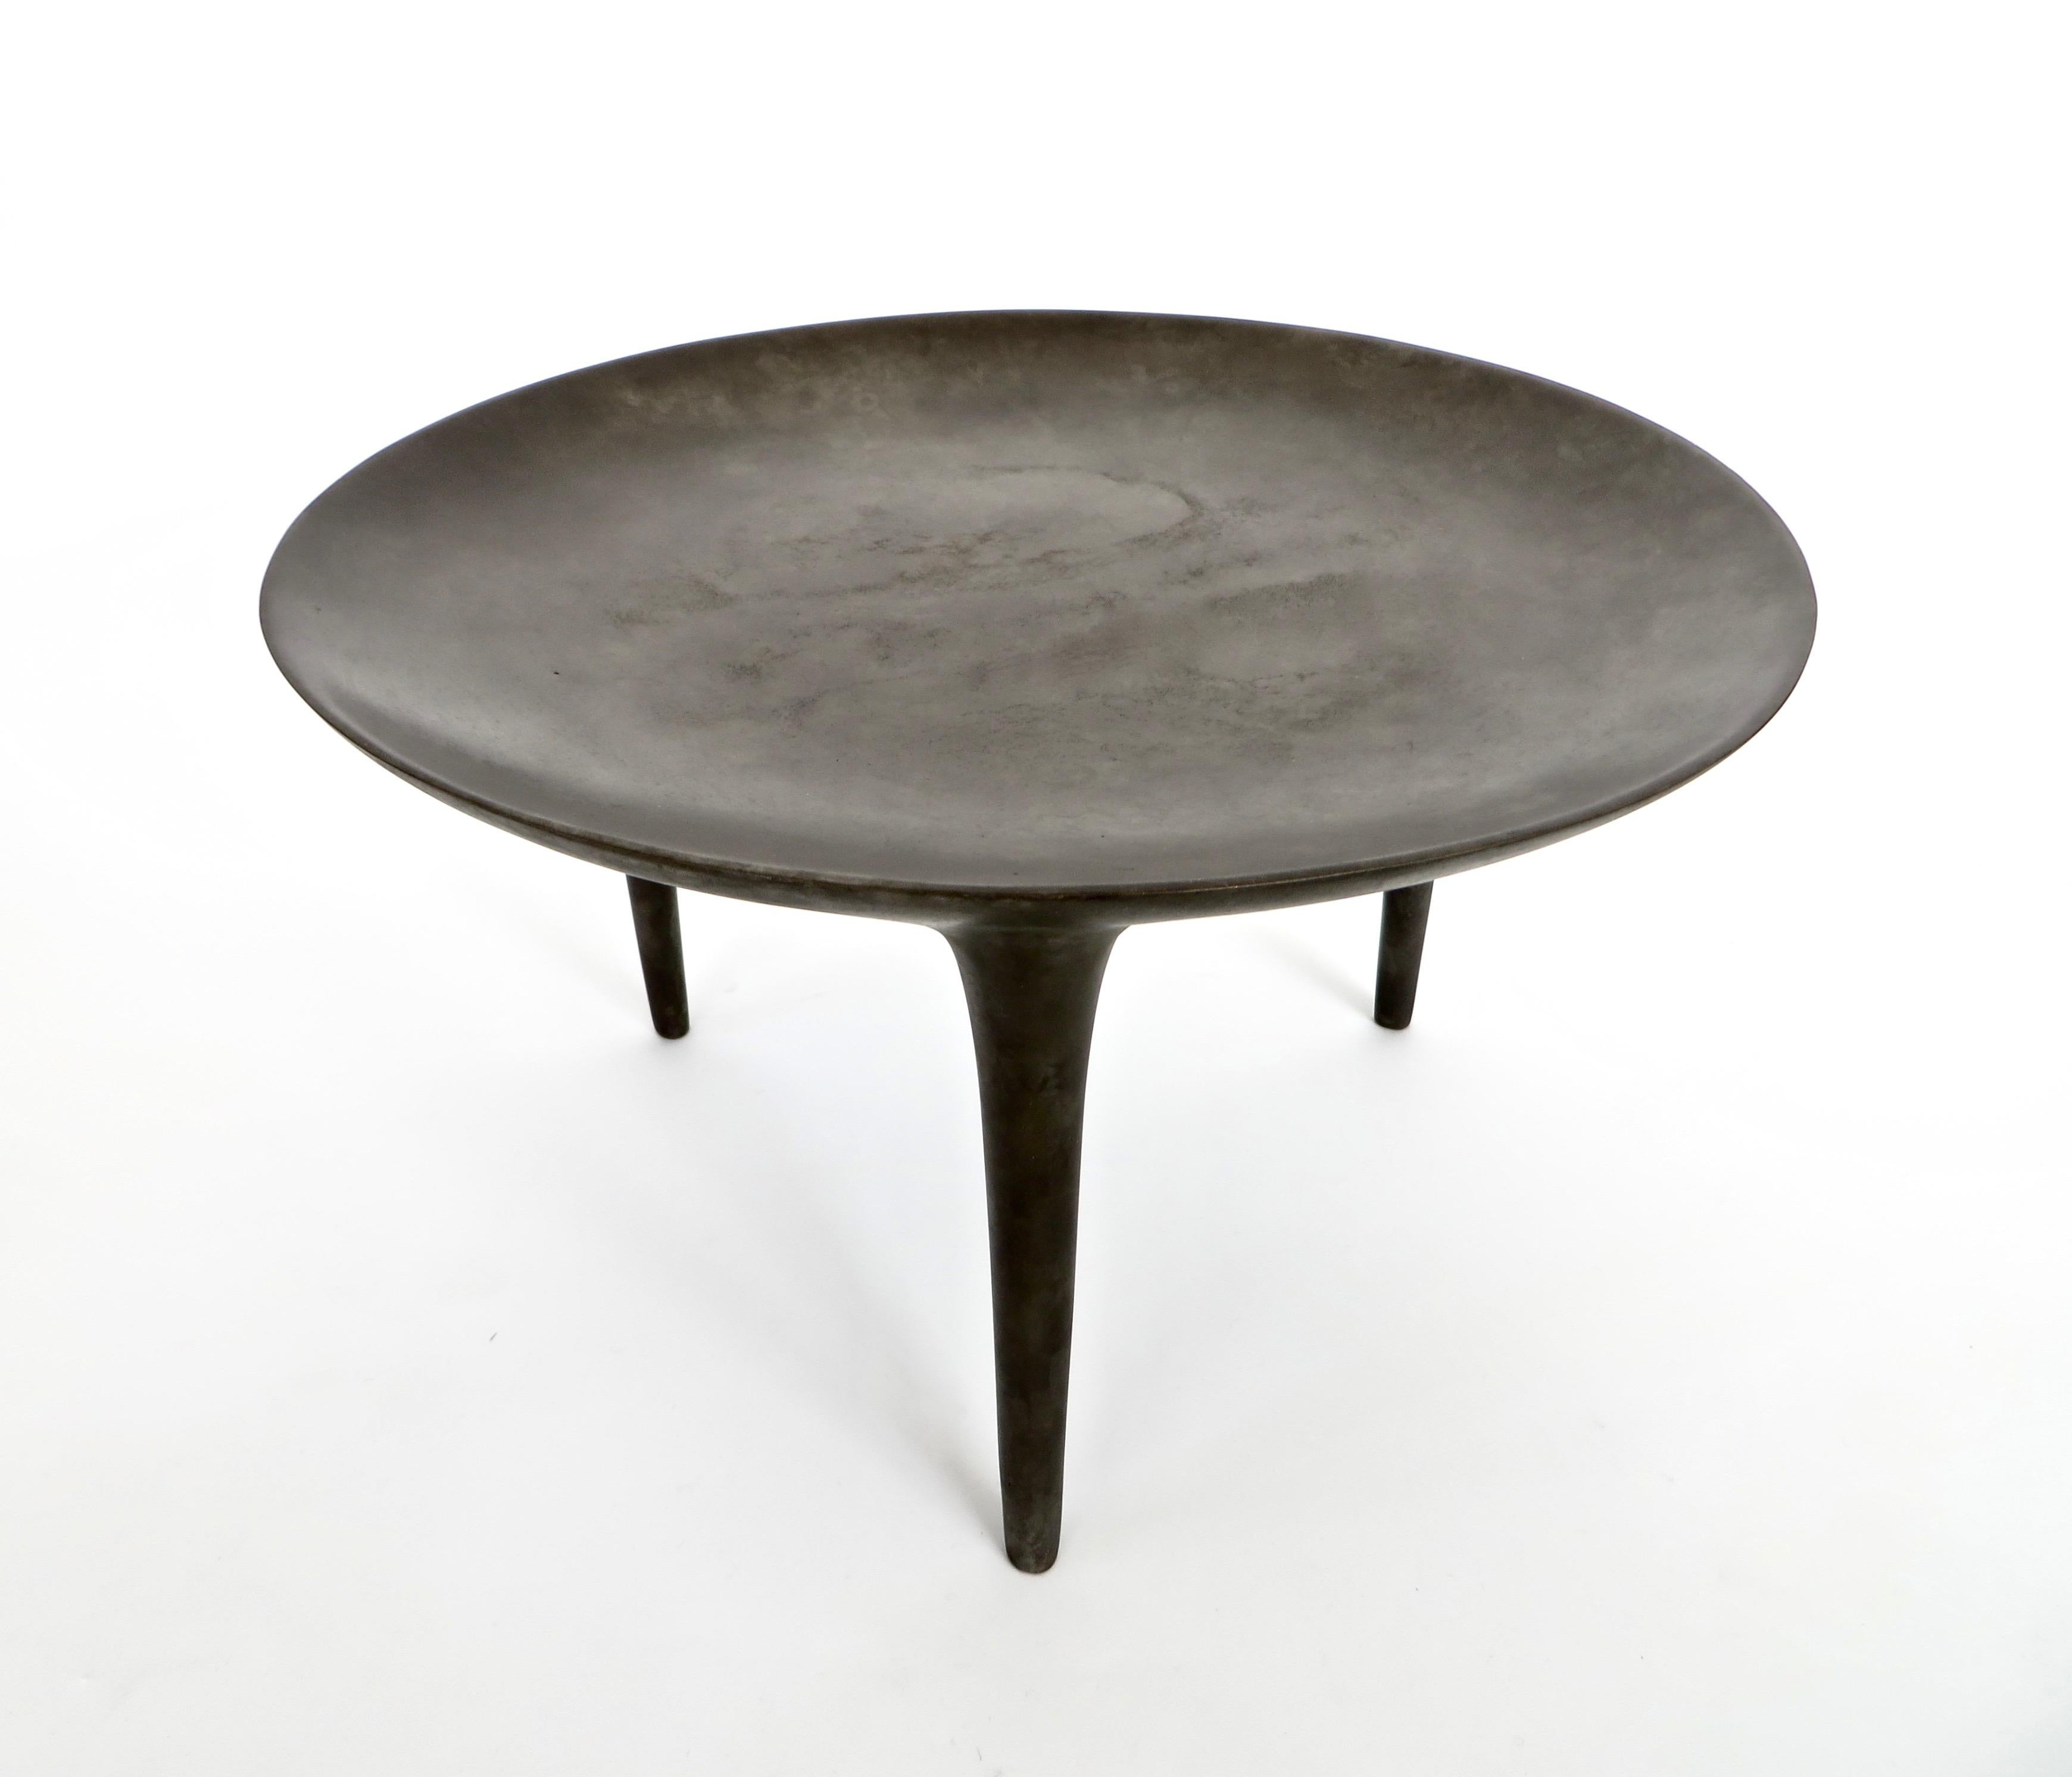 Handmade low three-legged cast bronze brazier or side table from the Rick Owens home collection. 
Low Brazier three-legged table in solid bronze with nitrate finish. Shown is the nitrate finish. 
Signed Rick Owens. 
Each table is a piece unique with